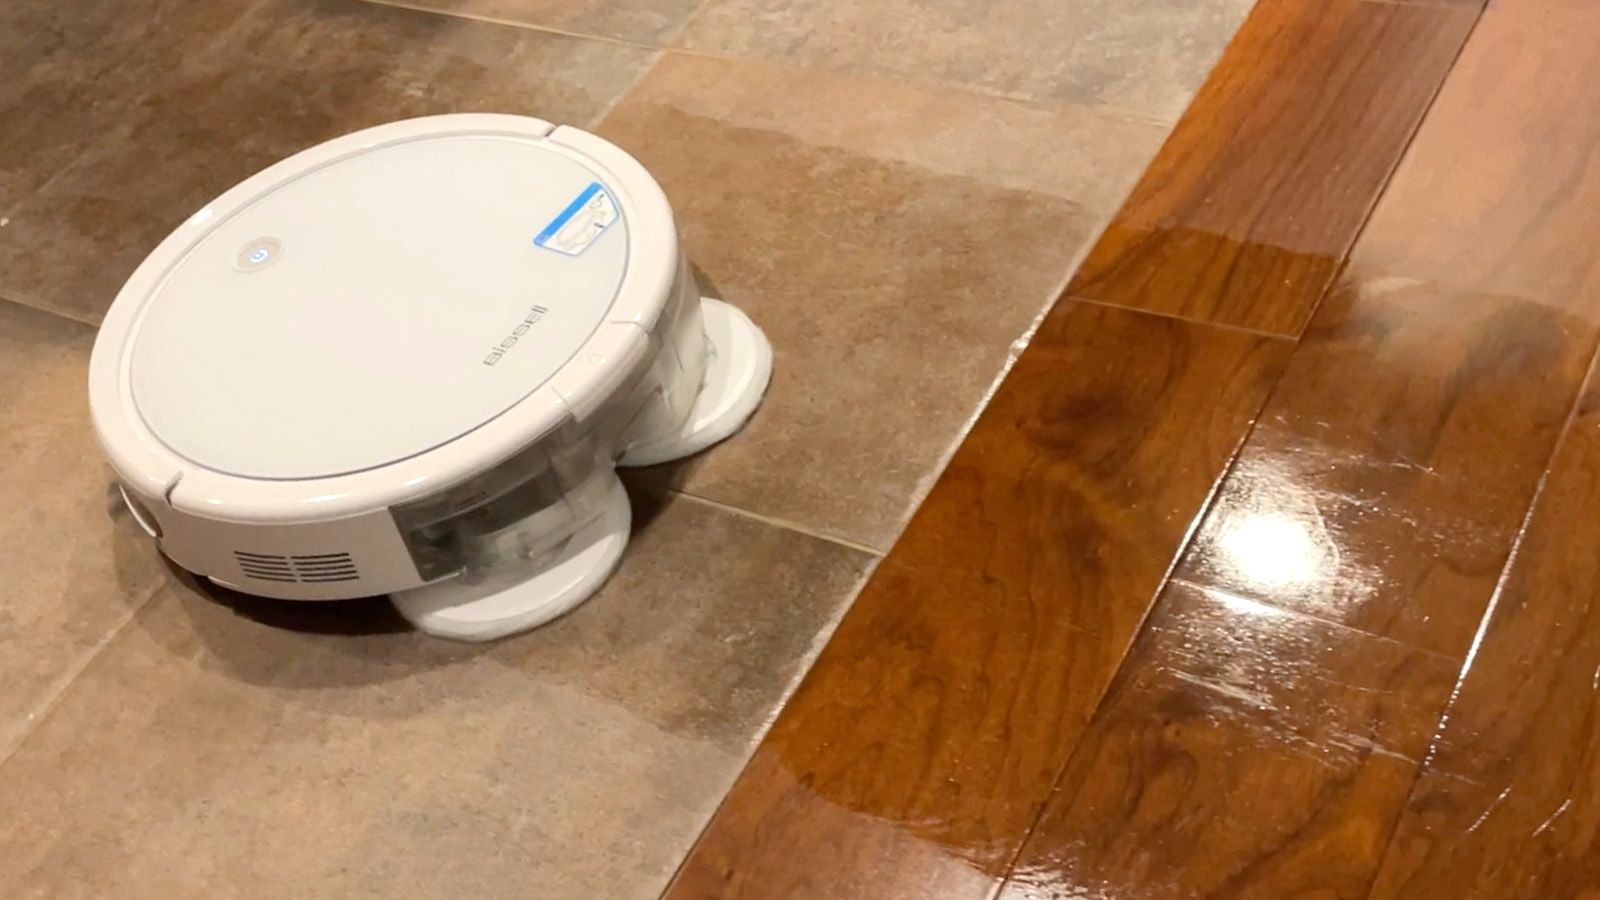 Save $300 and Let This Robot Vacuum Clean Your Home This Year - CNET